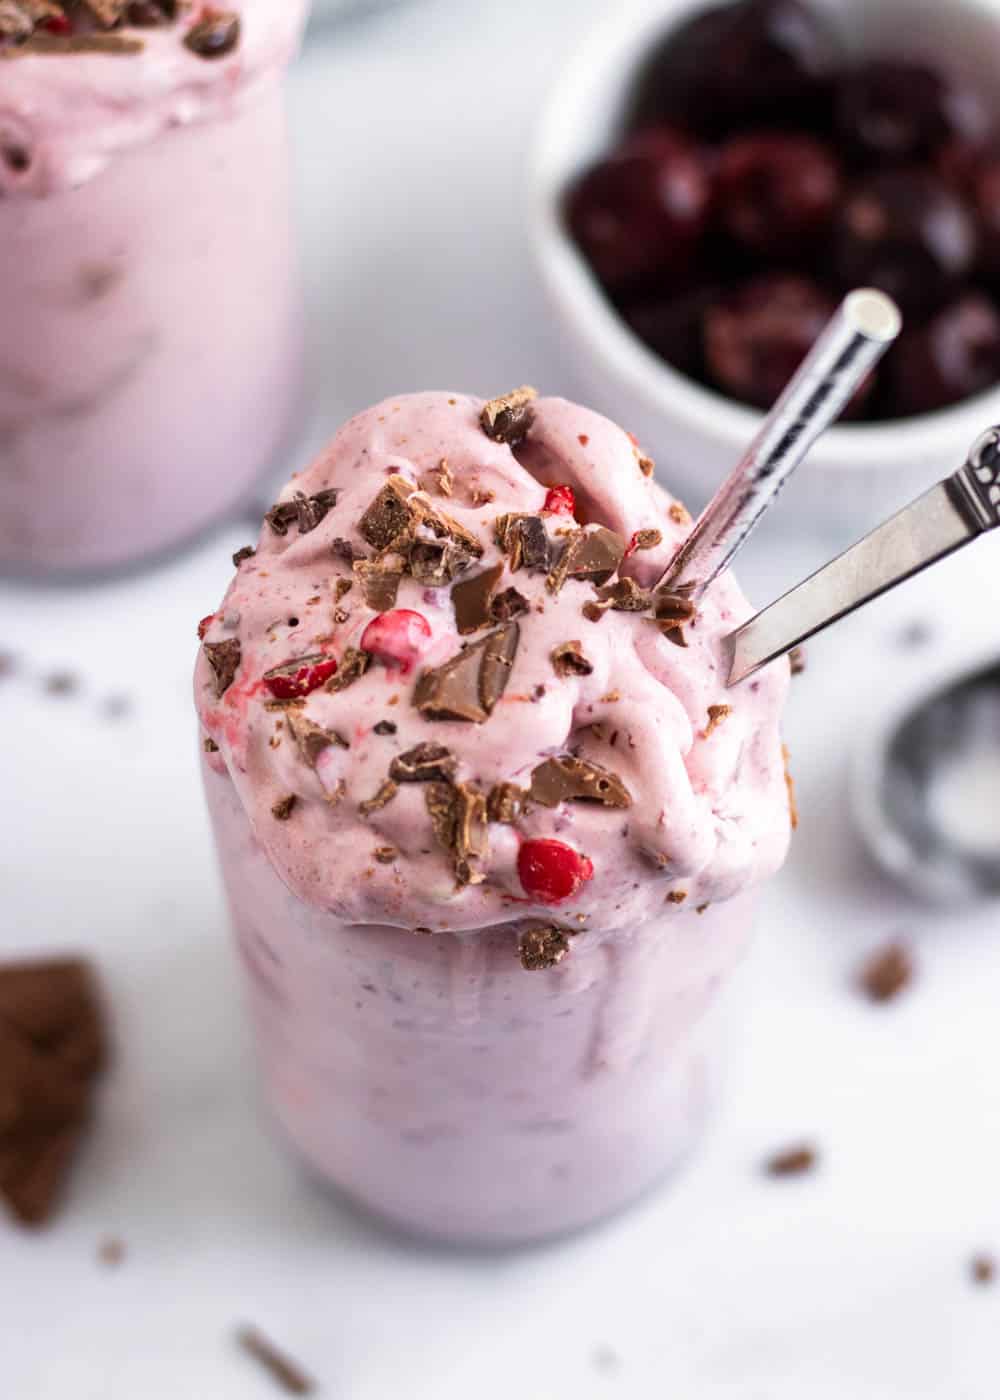 Cherry milkshake with chocolate in and straw and spoon.